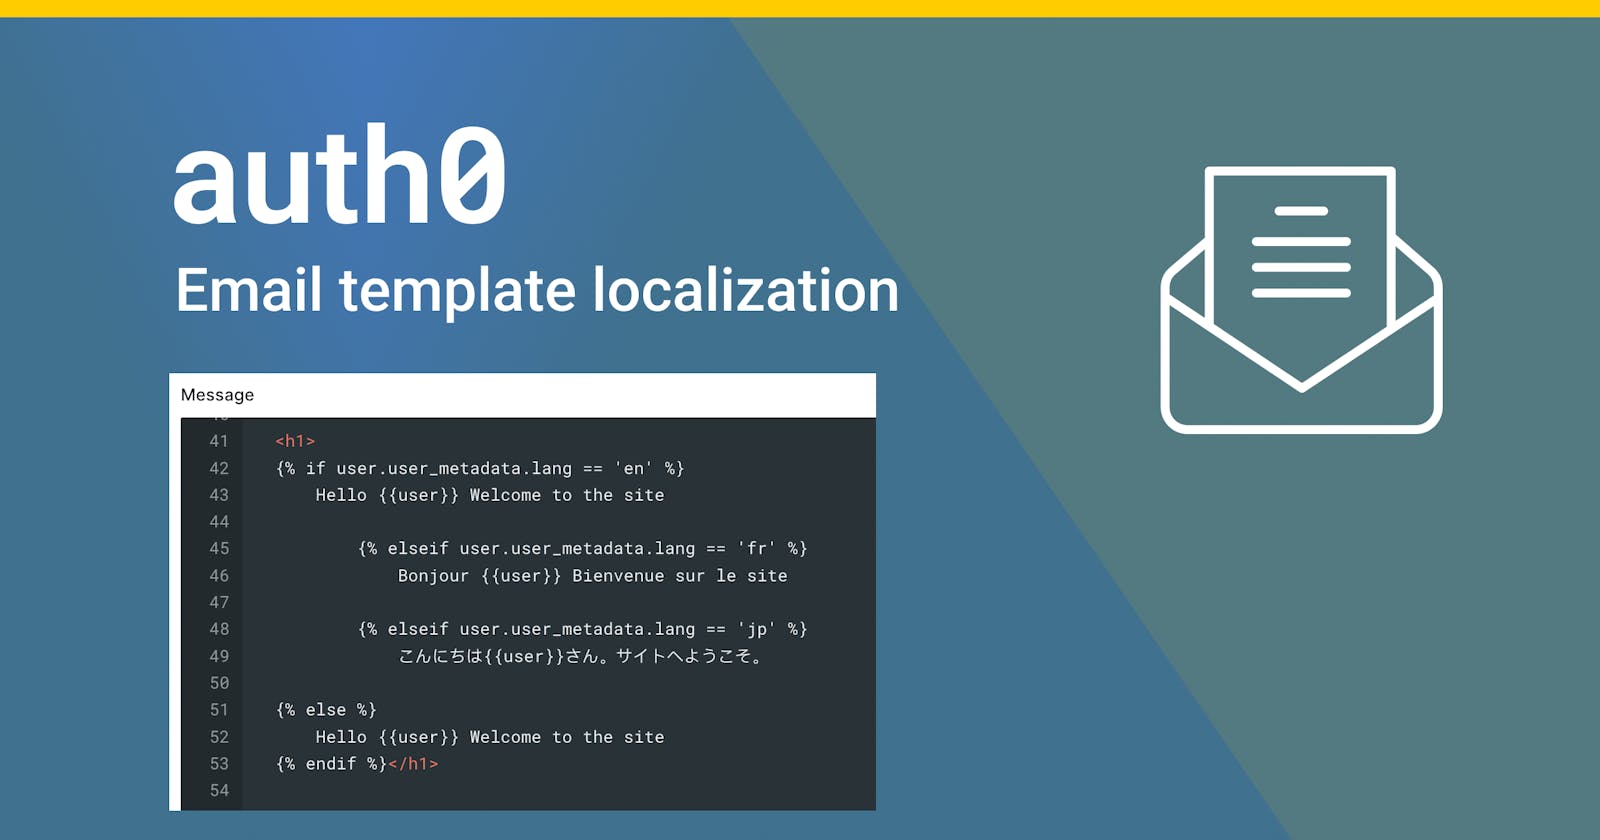 Use JSON to localize(translate) Auth0 email templates based on user language